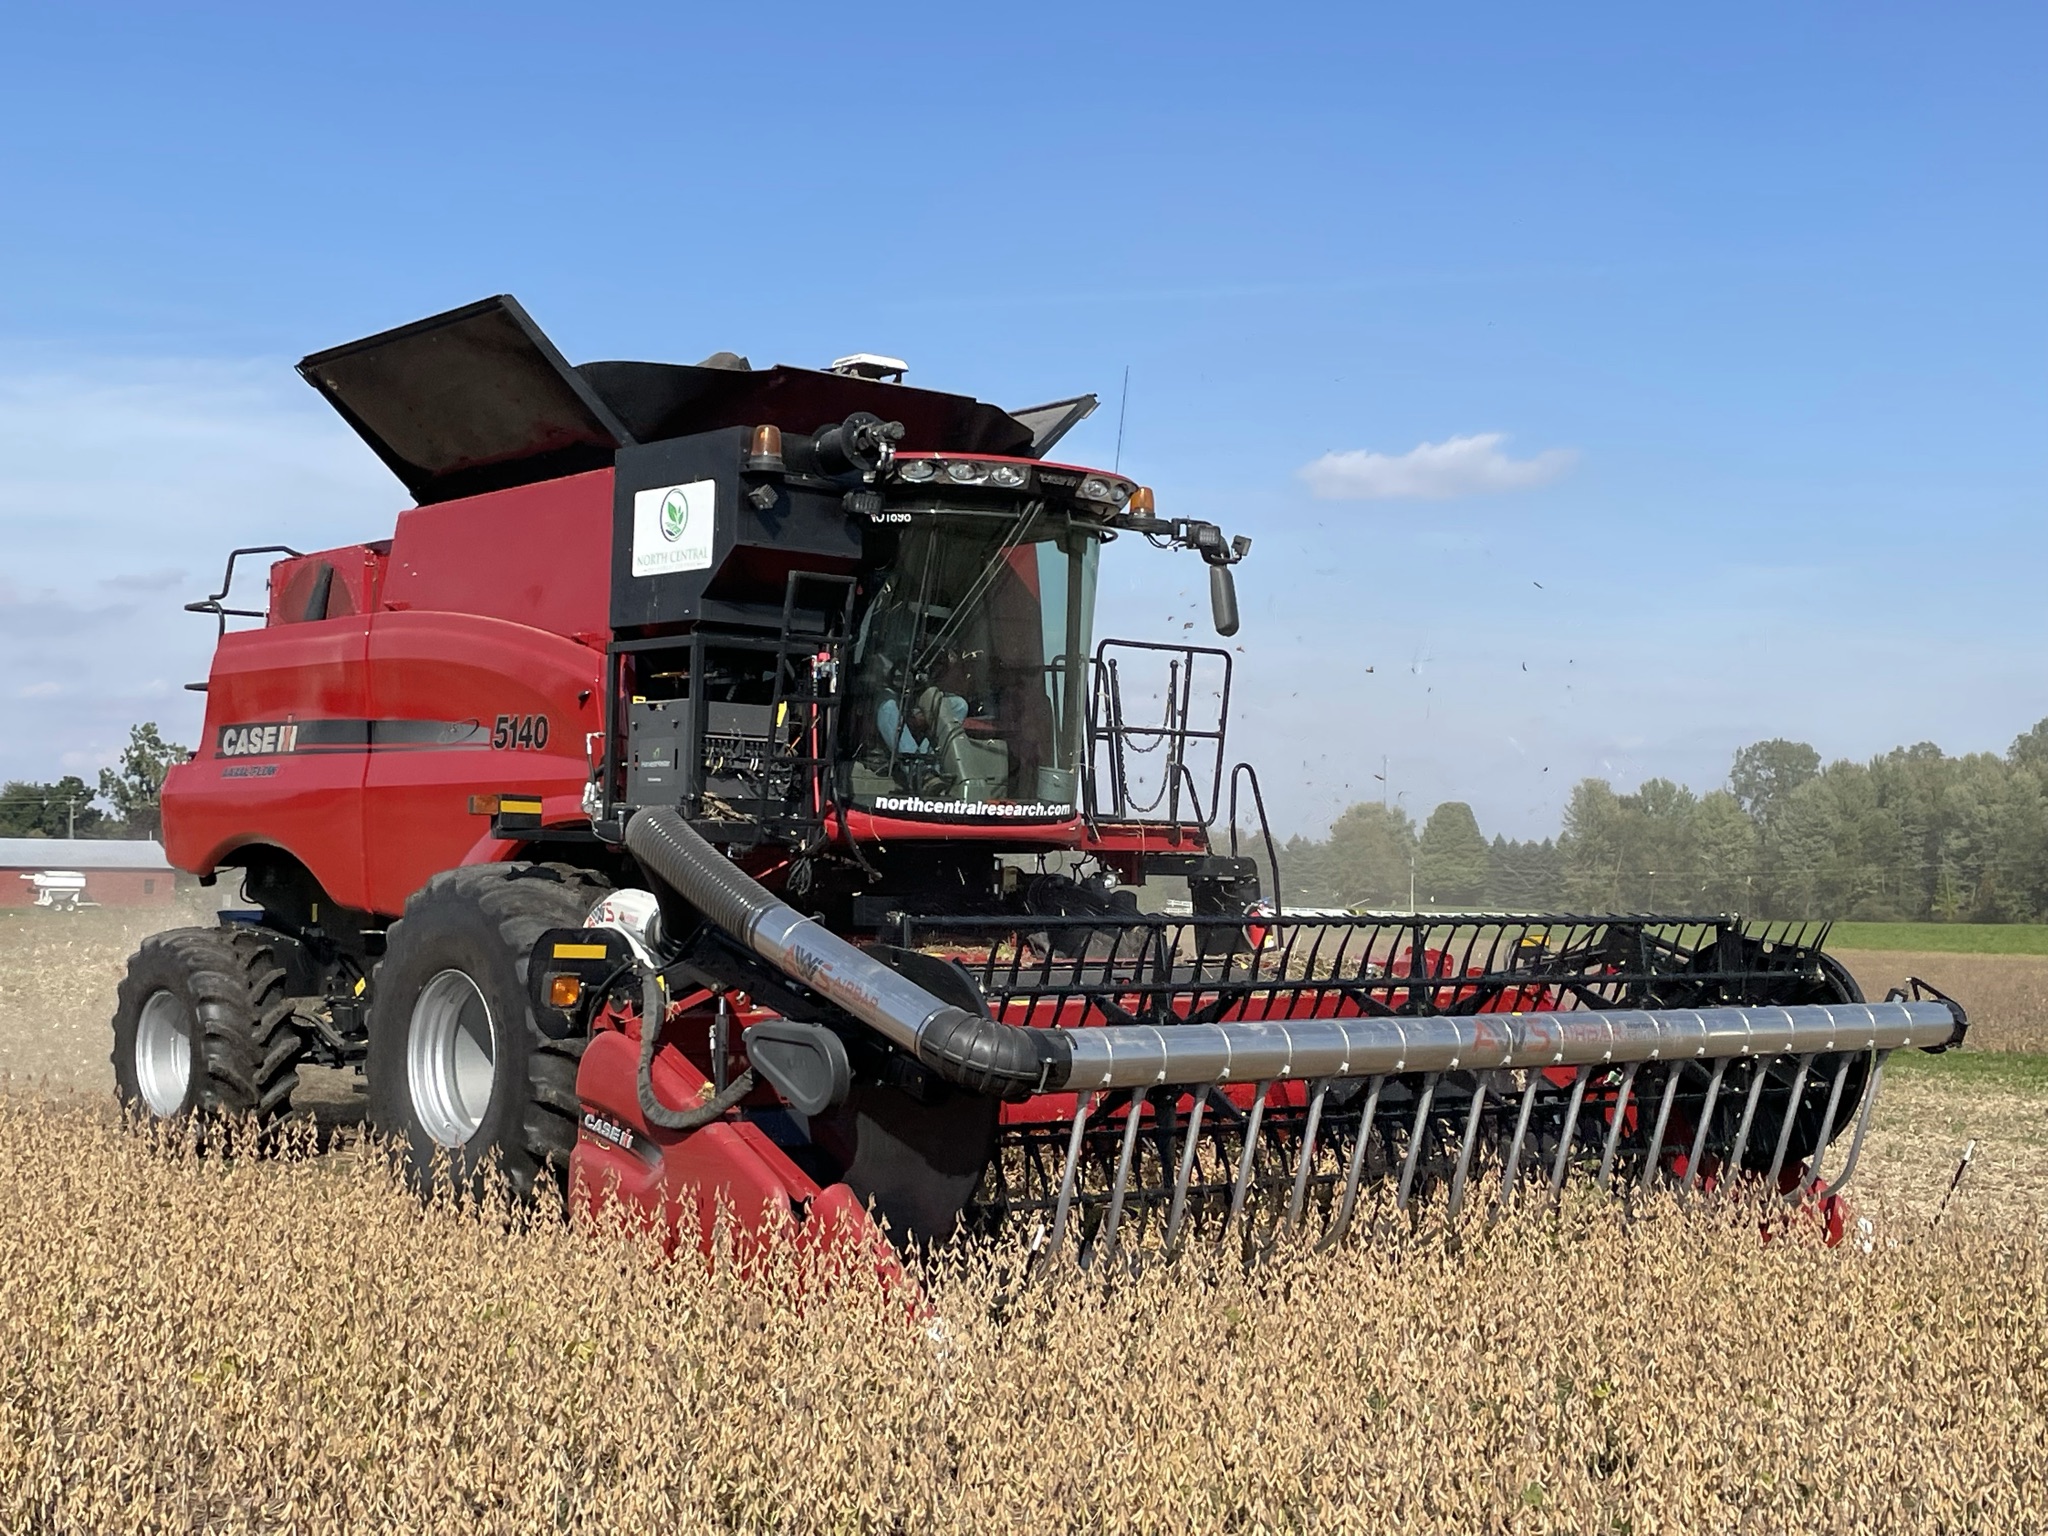 Accurate plot yield with HarvestMaster GrainGage technology.